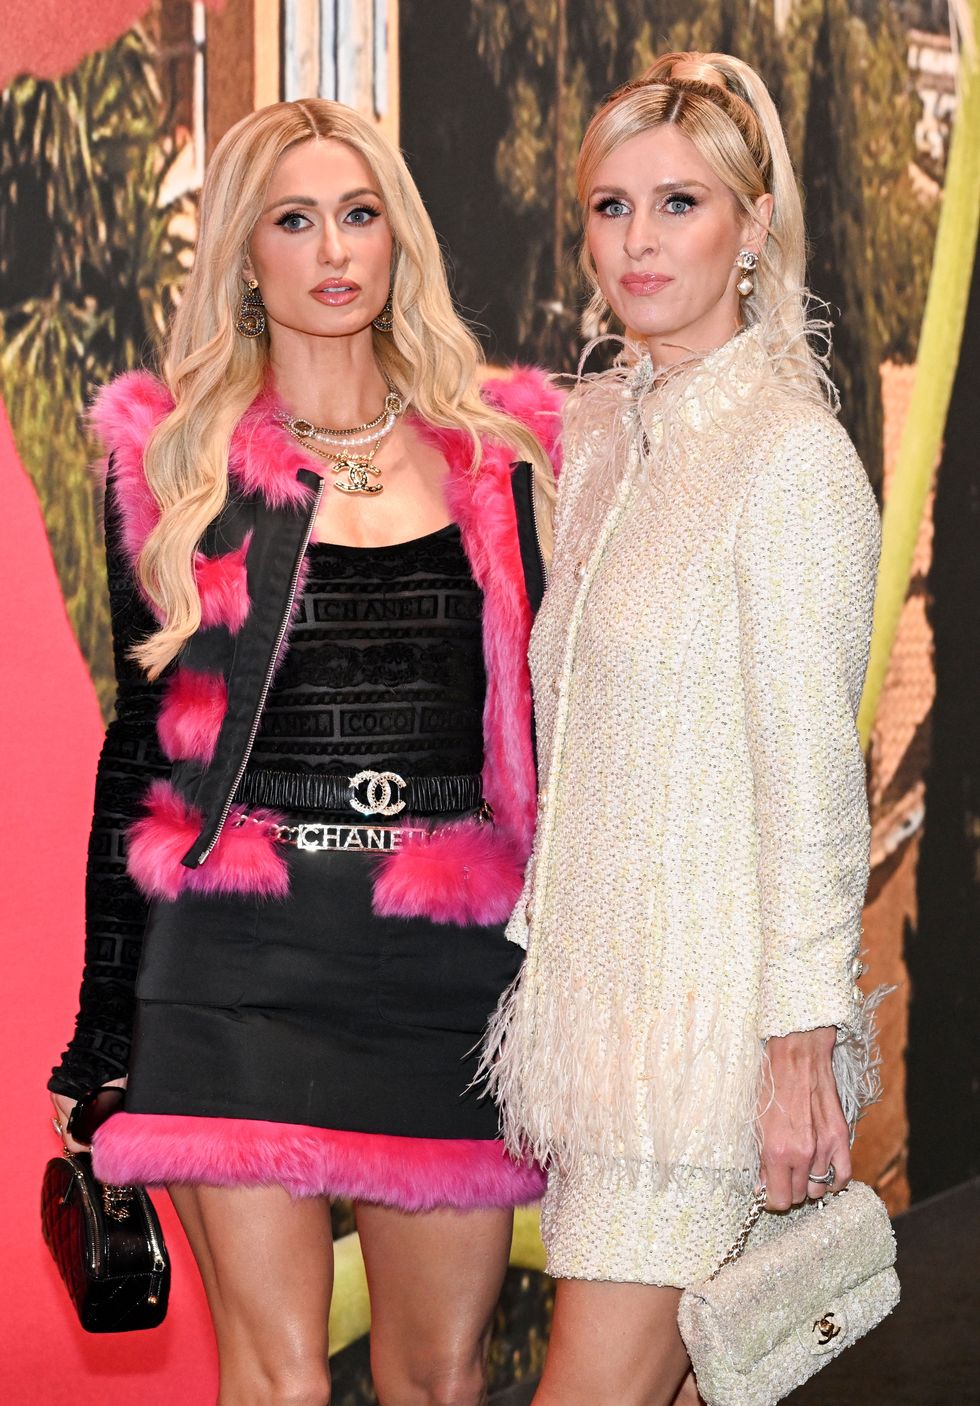 us paris hilton l and her sister nicky hilton pose during a photocall prior to the chanel show as part of the paris fashion week womenswear springsummer 2024 at the grand palais ephemere in paris on october 3, 2023 photo by bertrand guay afp photo by bertrand guayafp via getty images